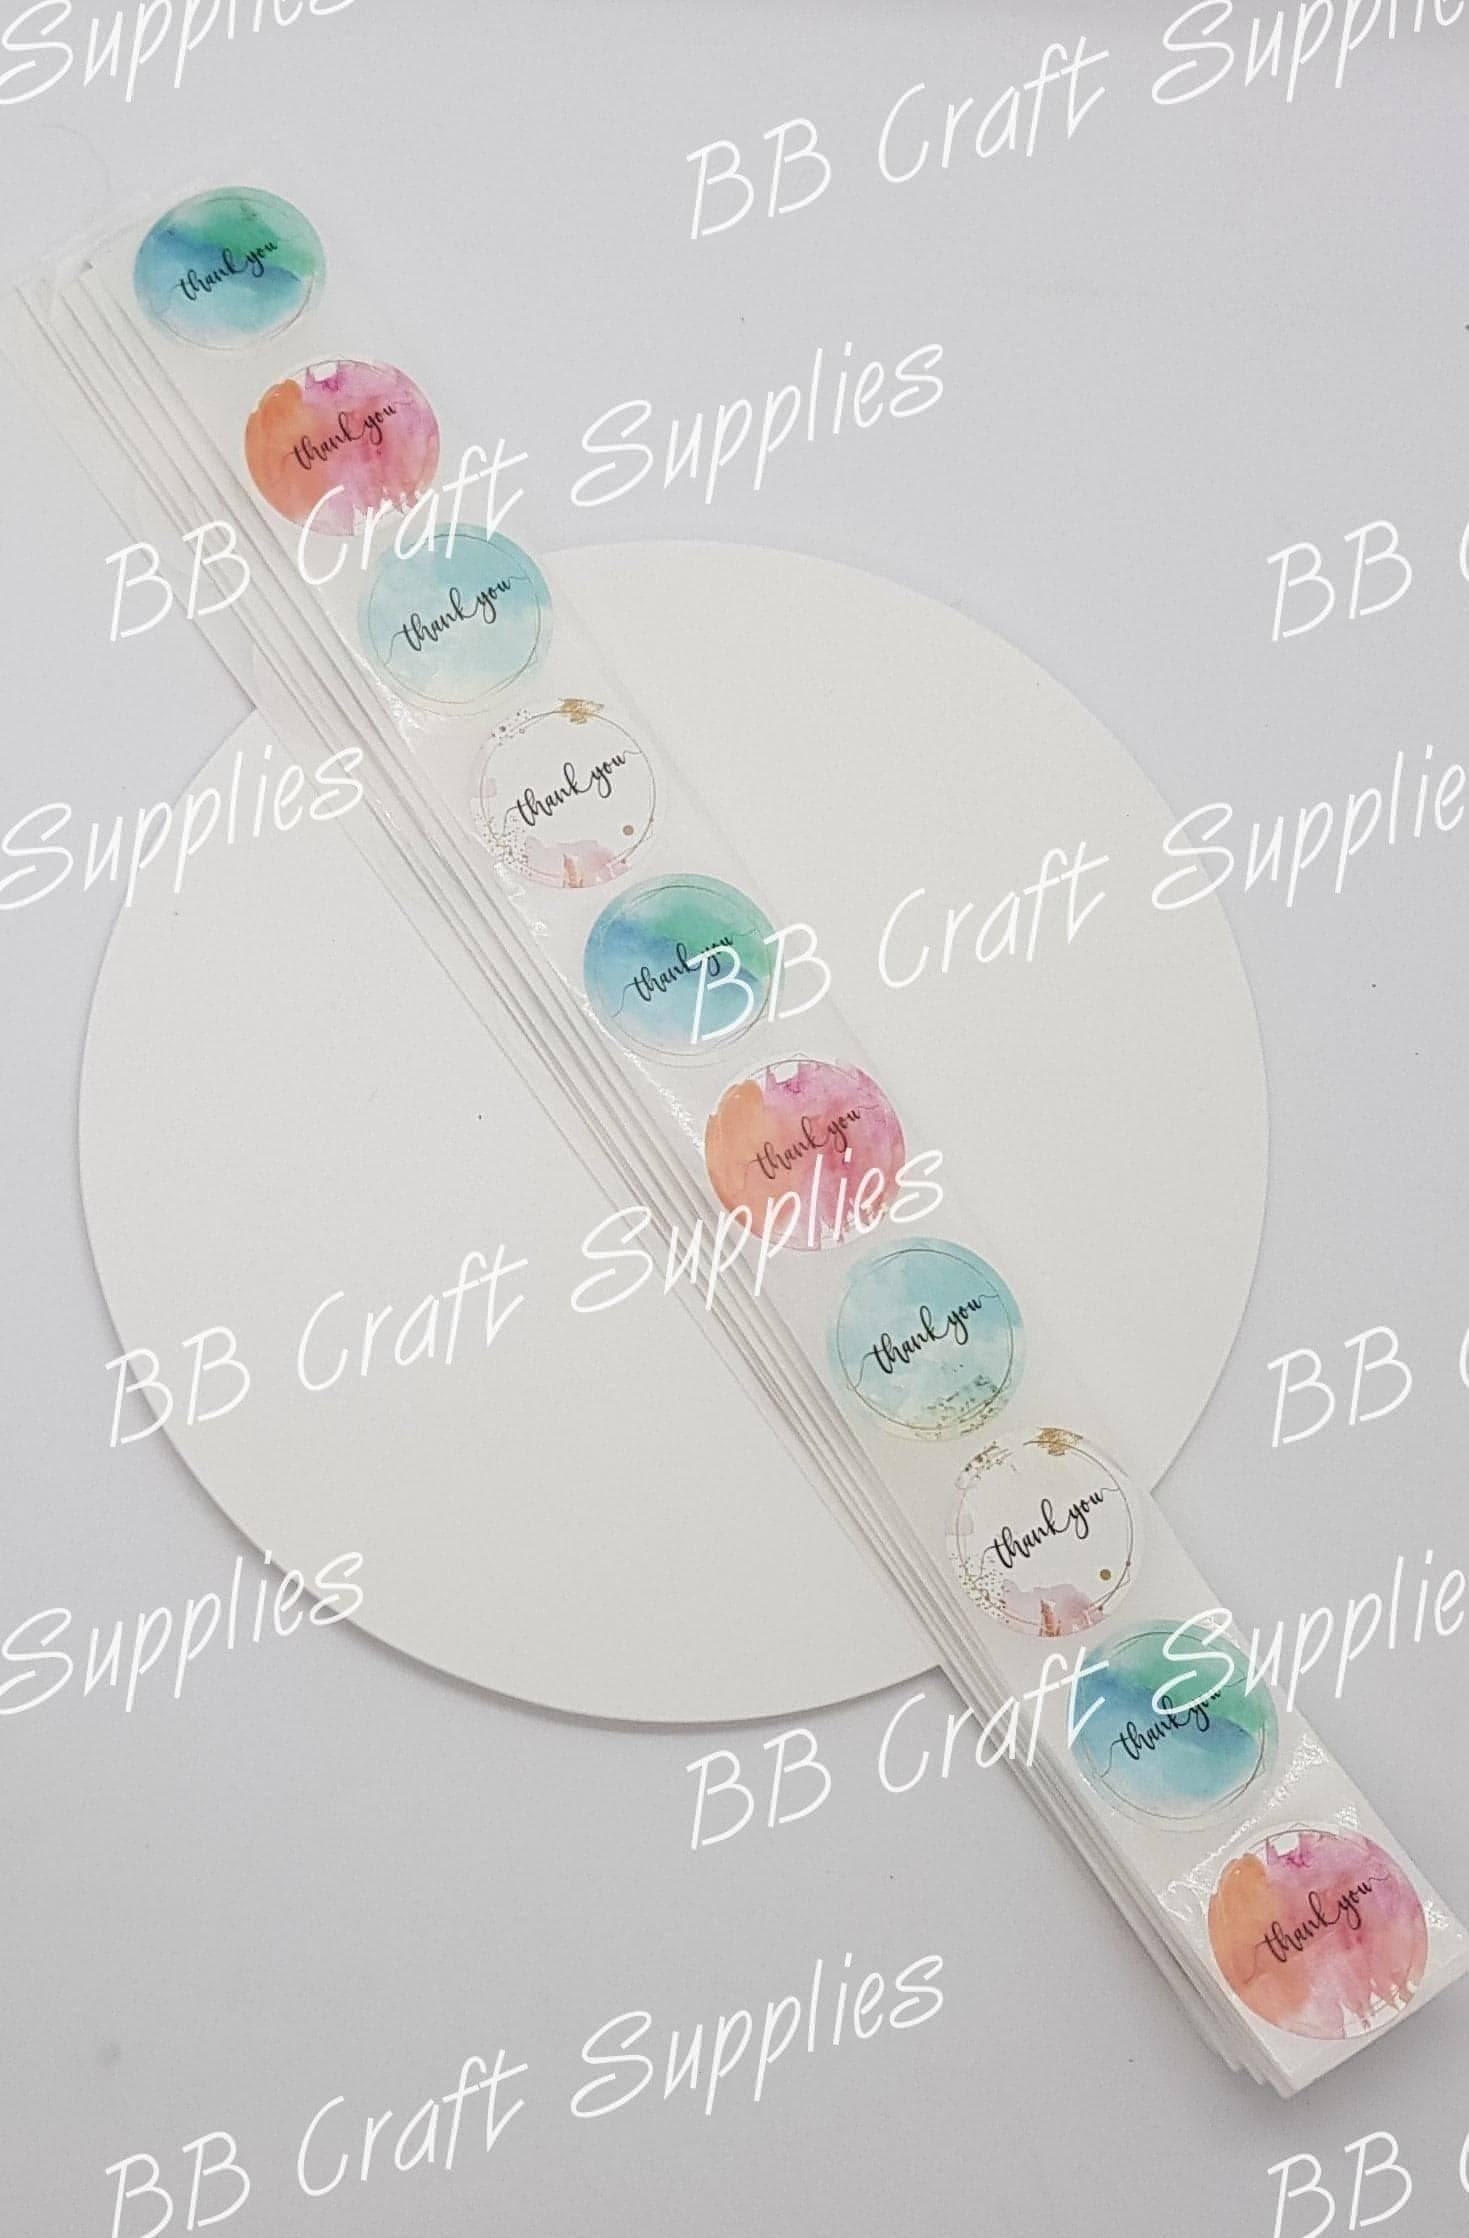 Clearance - Stickers - 100 Pack - Accessories, Pretty Things, Stickers, Thankyou - Bare Butler Faux Leather Supplies 